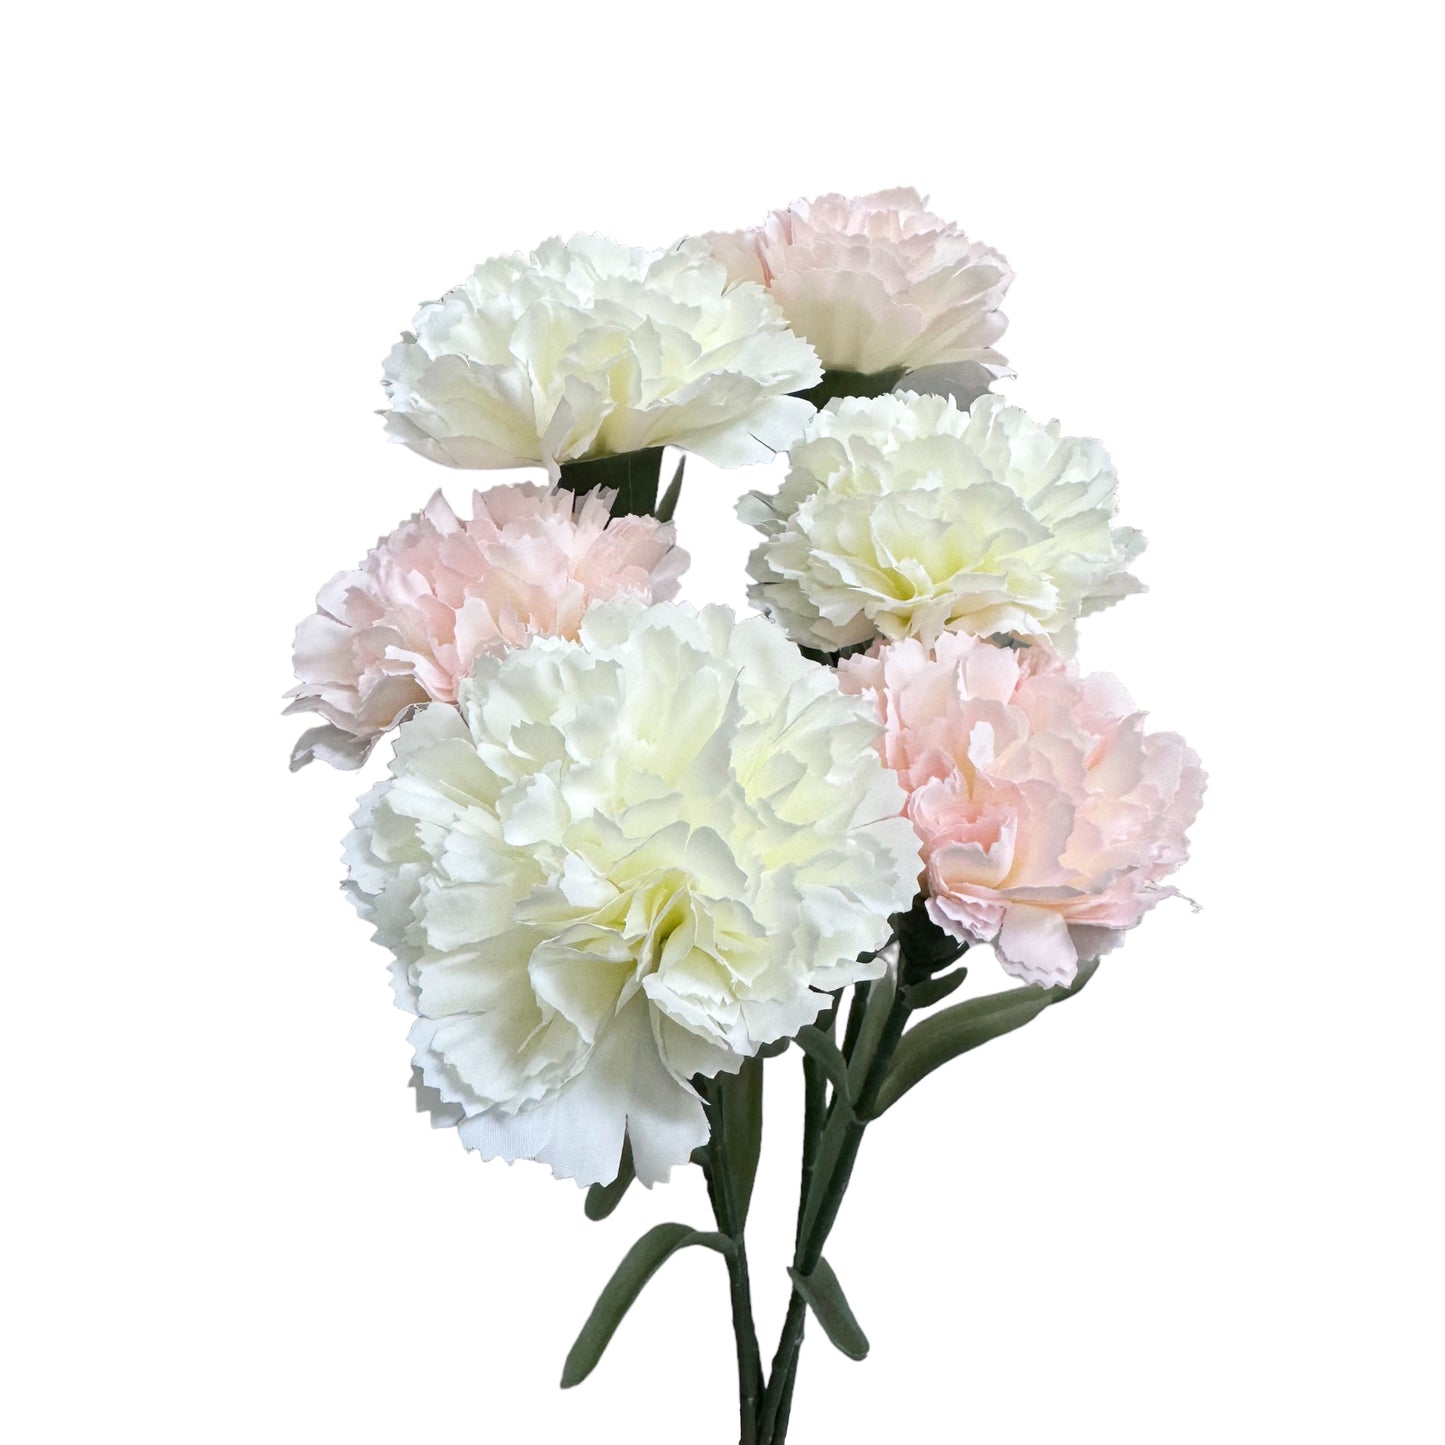 Set of 6 Flexible Carnation Stems in Pastel Shades